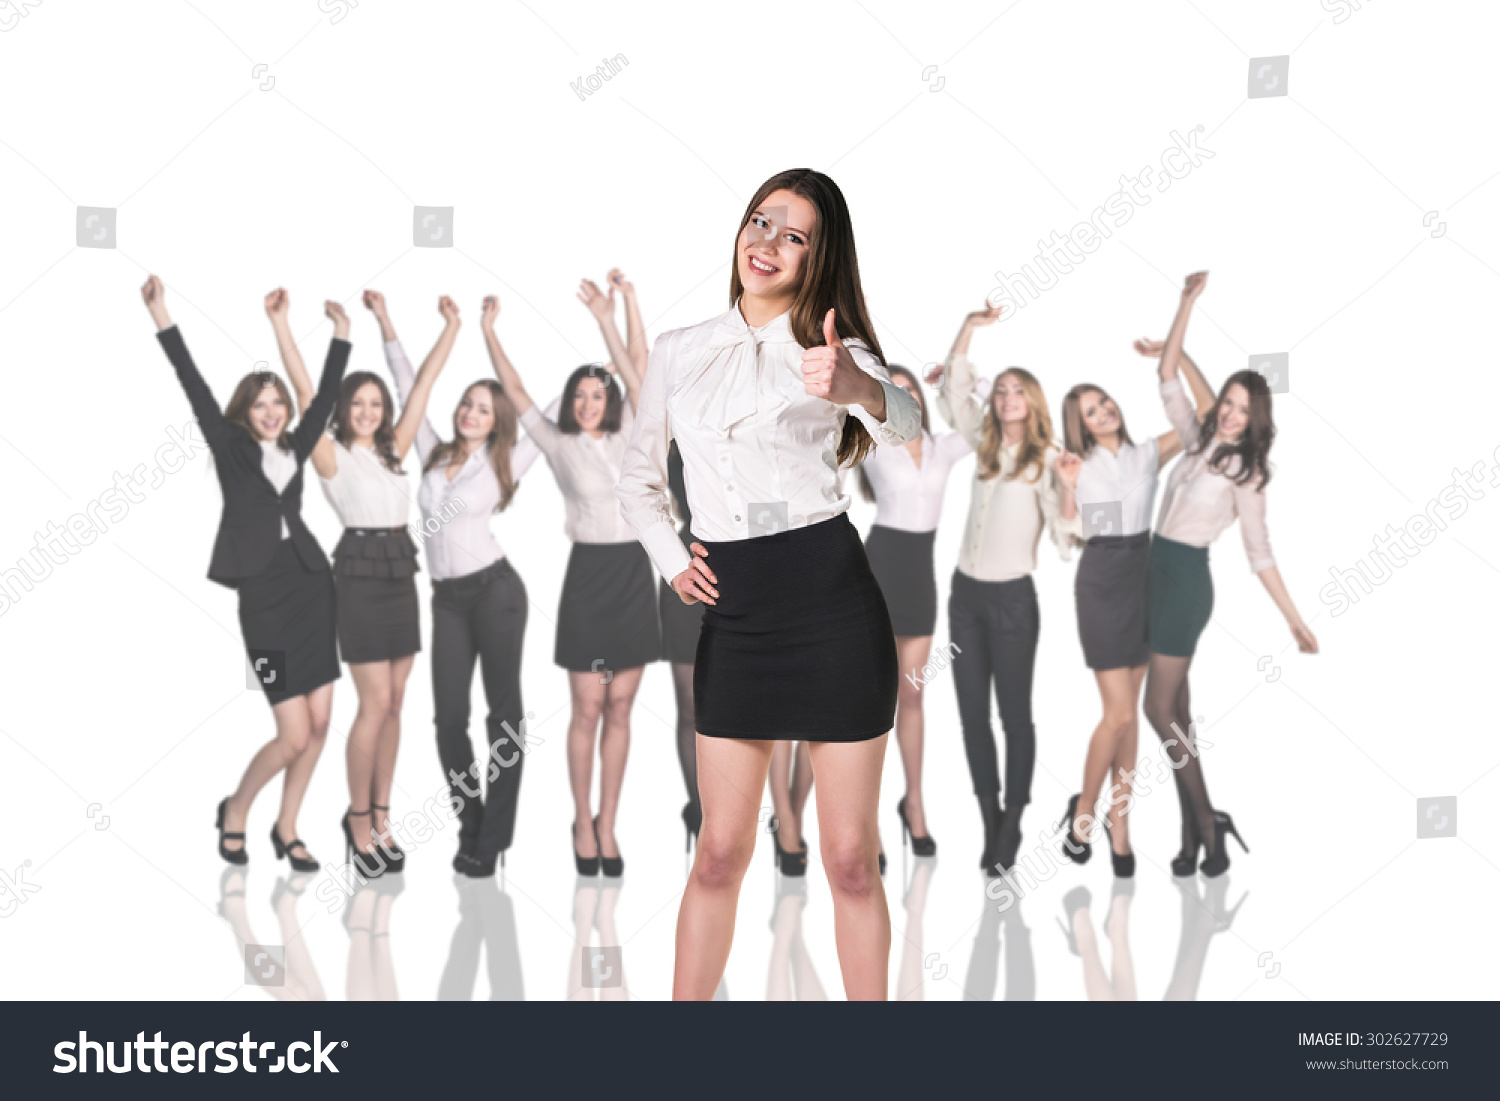 Businesswoman On The Background Of Smiling Happy Businesswomen Stock